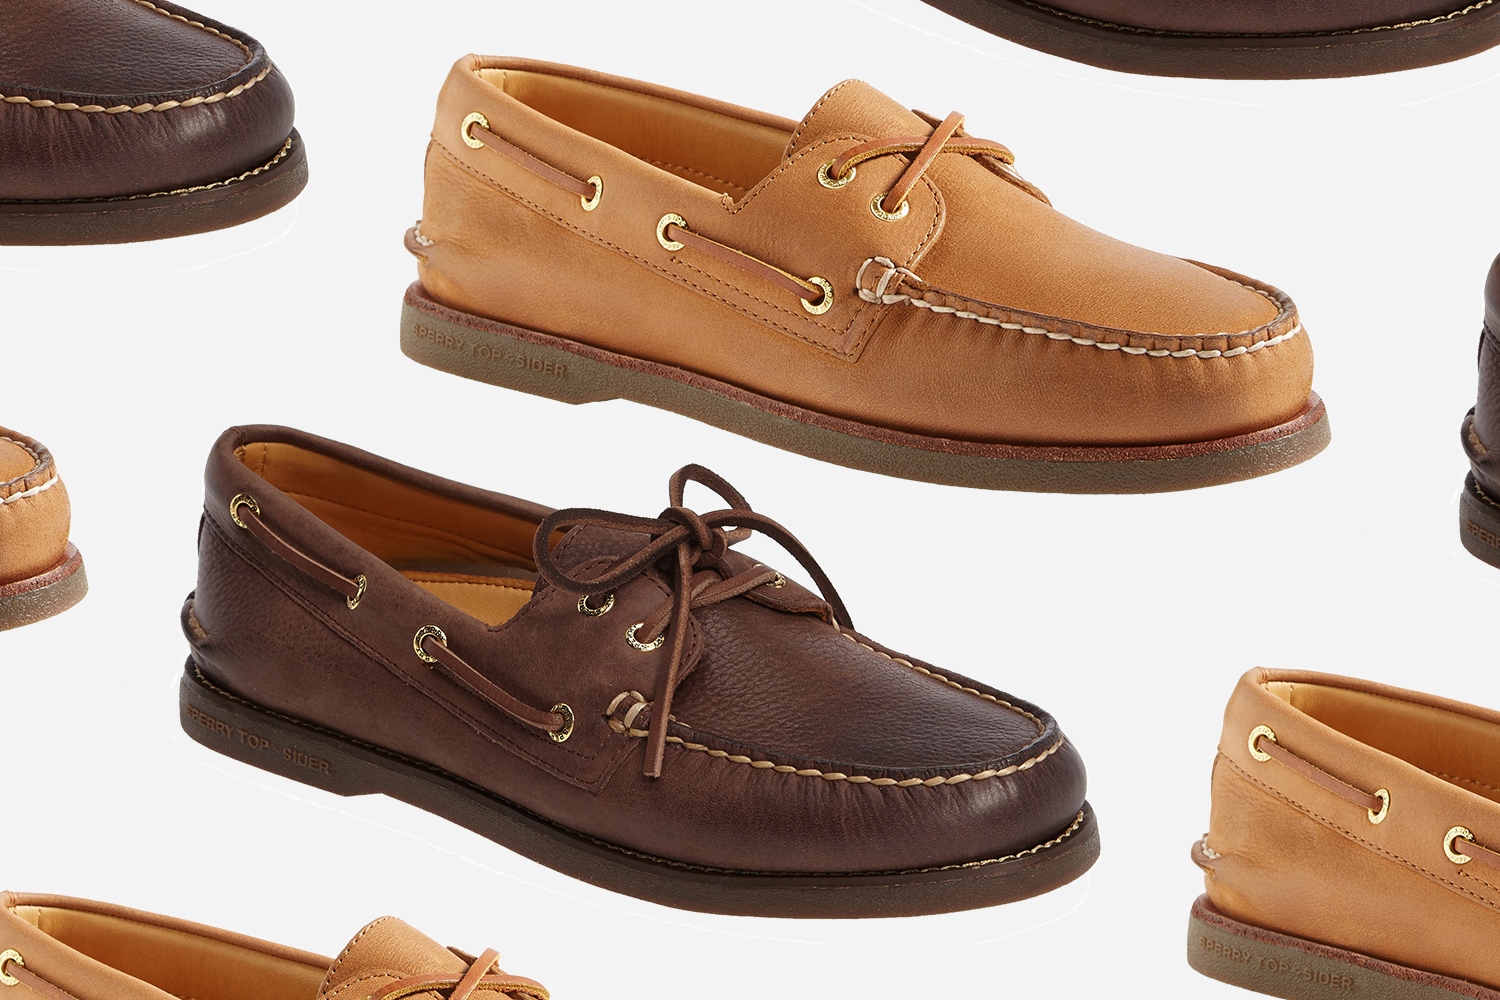 Sperry Gold Cup Authentic Original Boat Shoes Are $50 Off at Nordstrom ...